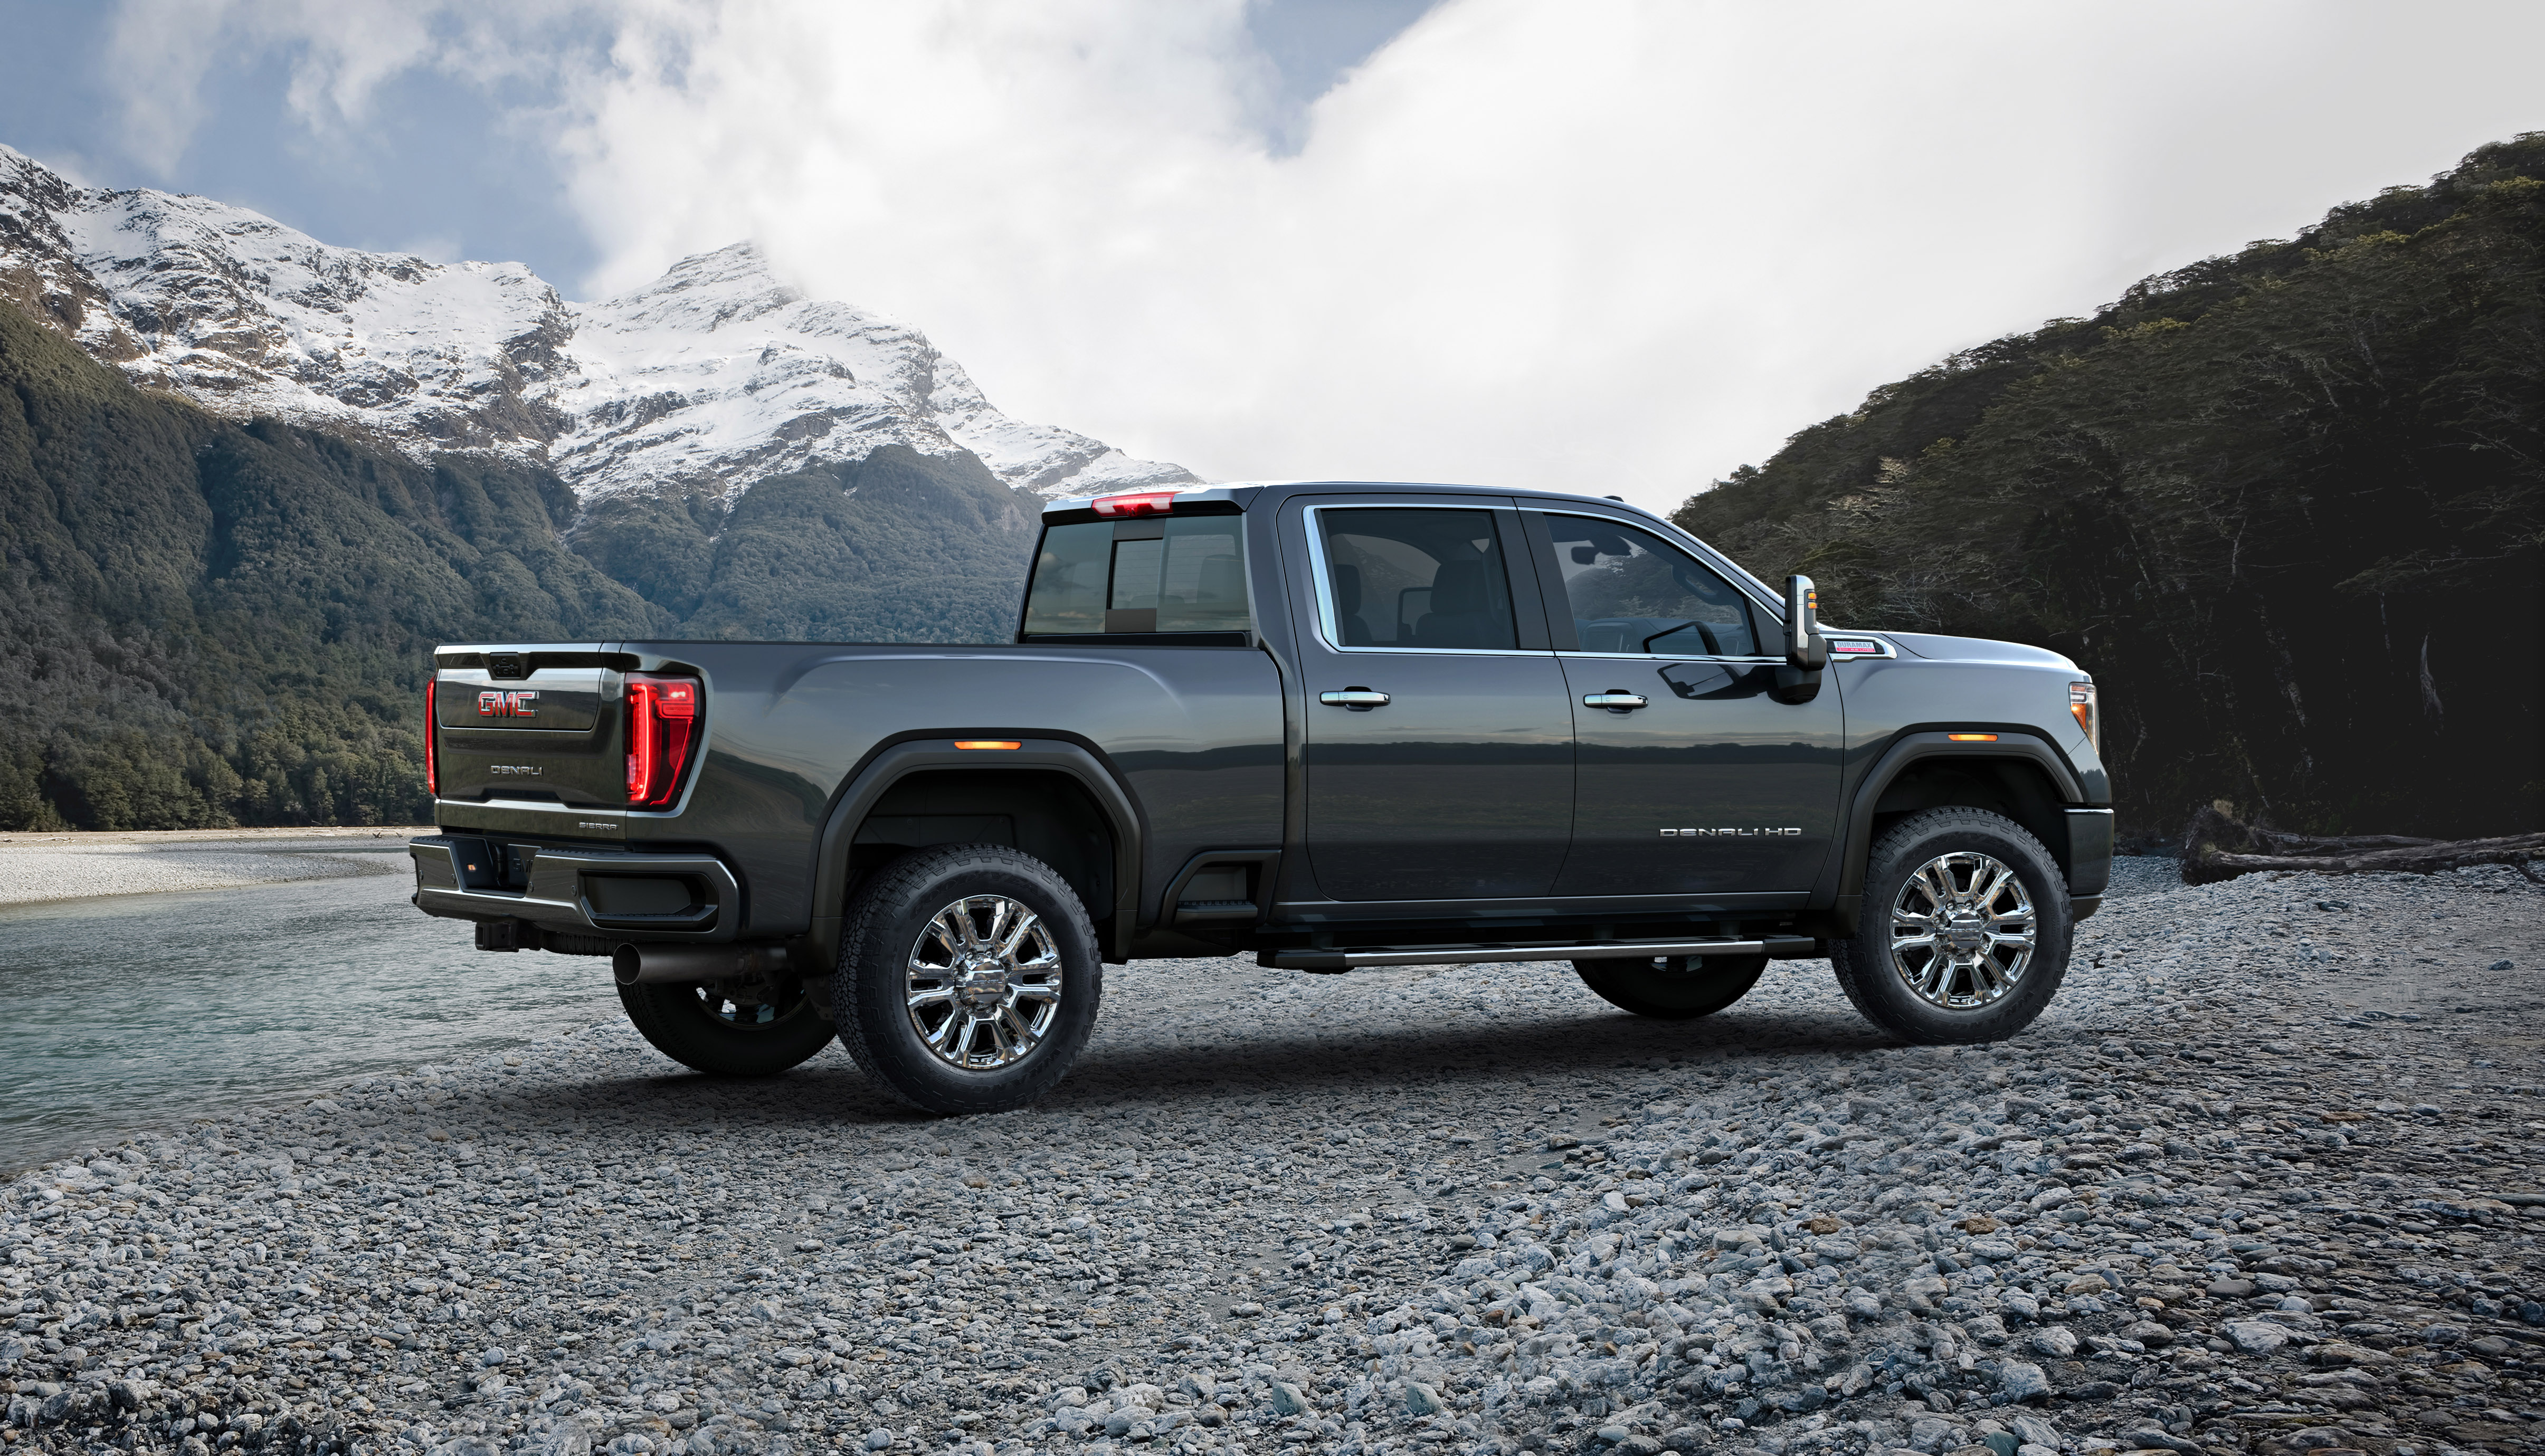 The GMC Sierra 2500HD parked off road in the mountains. 